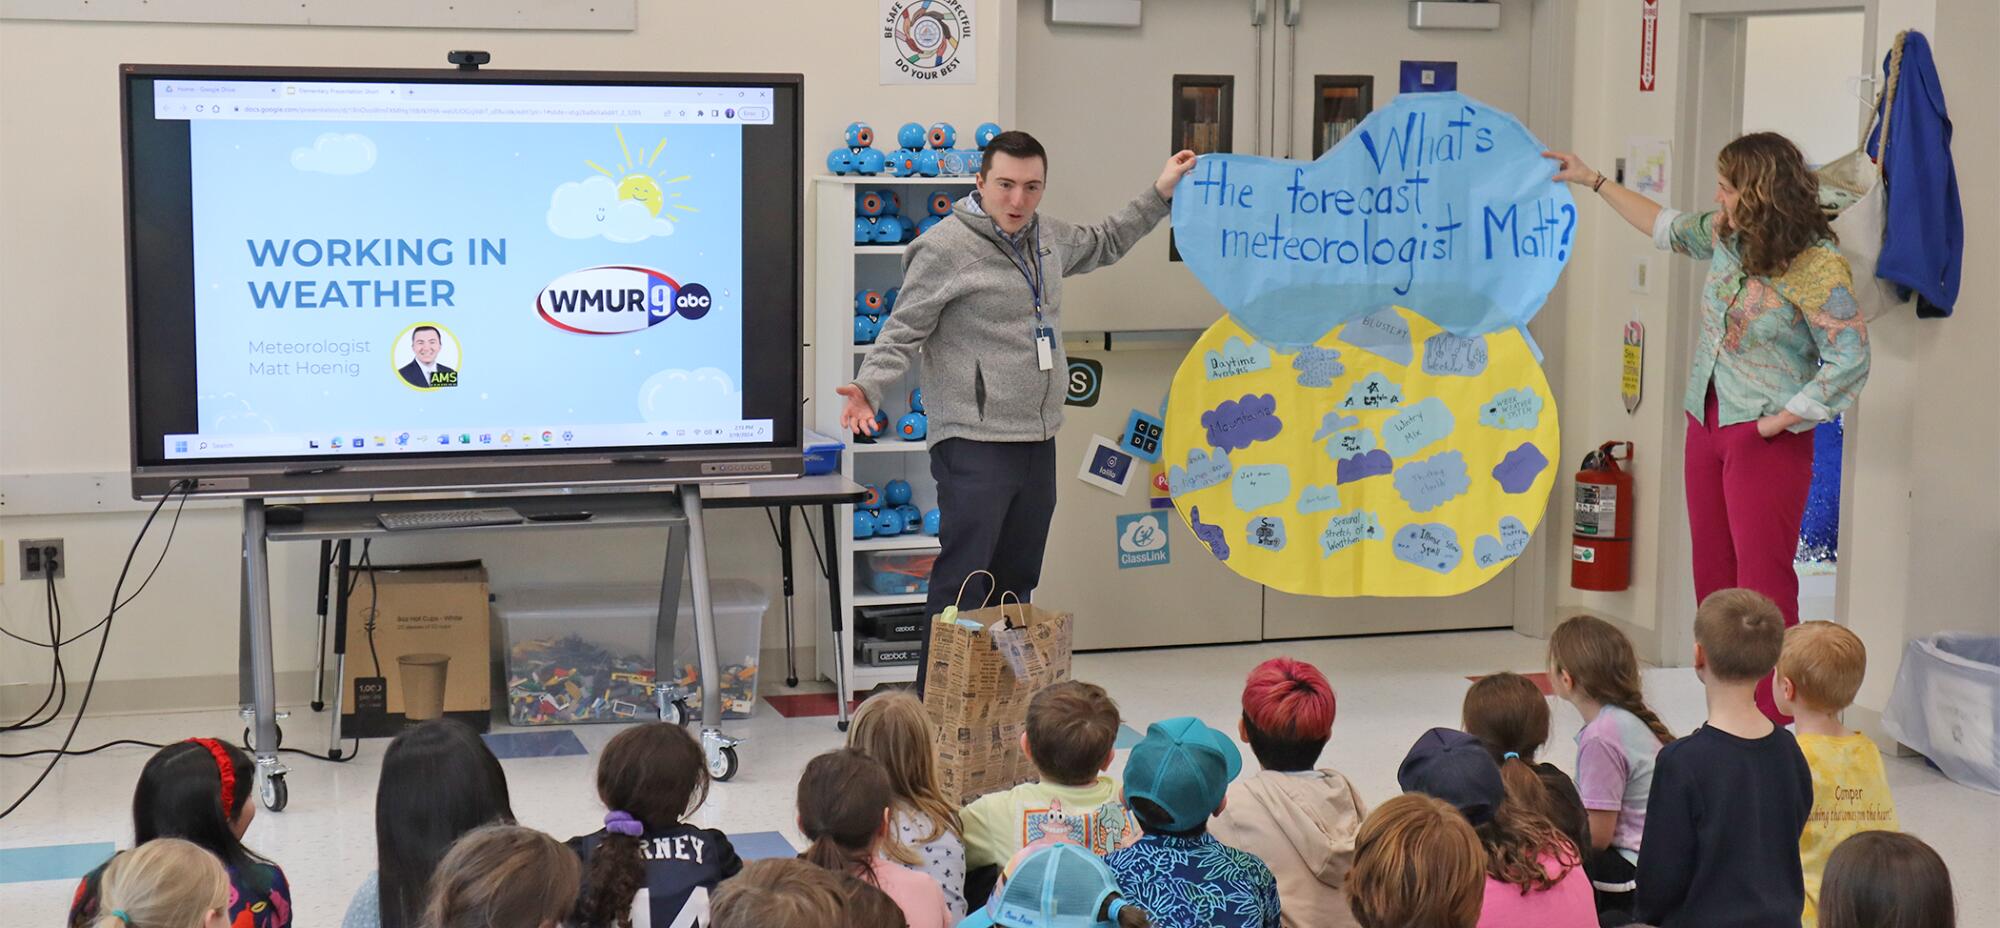 Meteorologist Matt Hoenig holds up a handmade weather cloud sign while presenting to a room full of students.